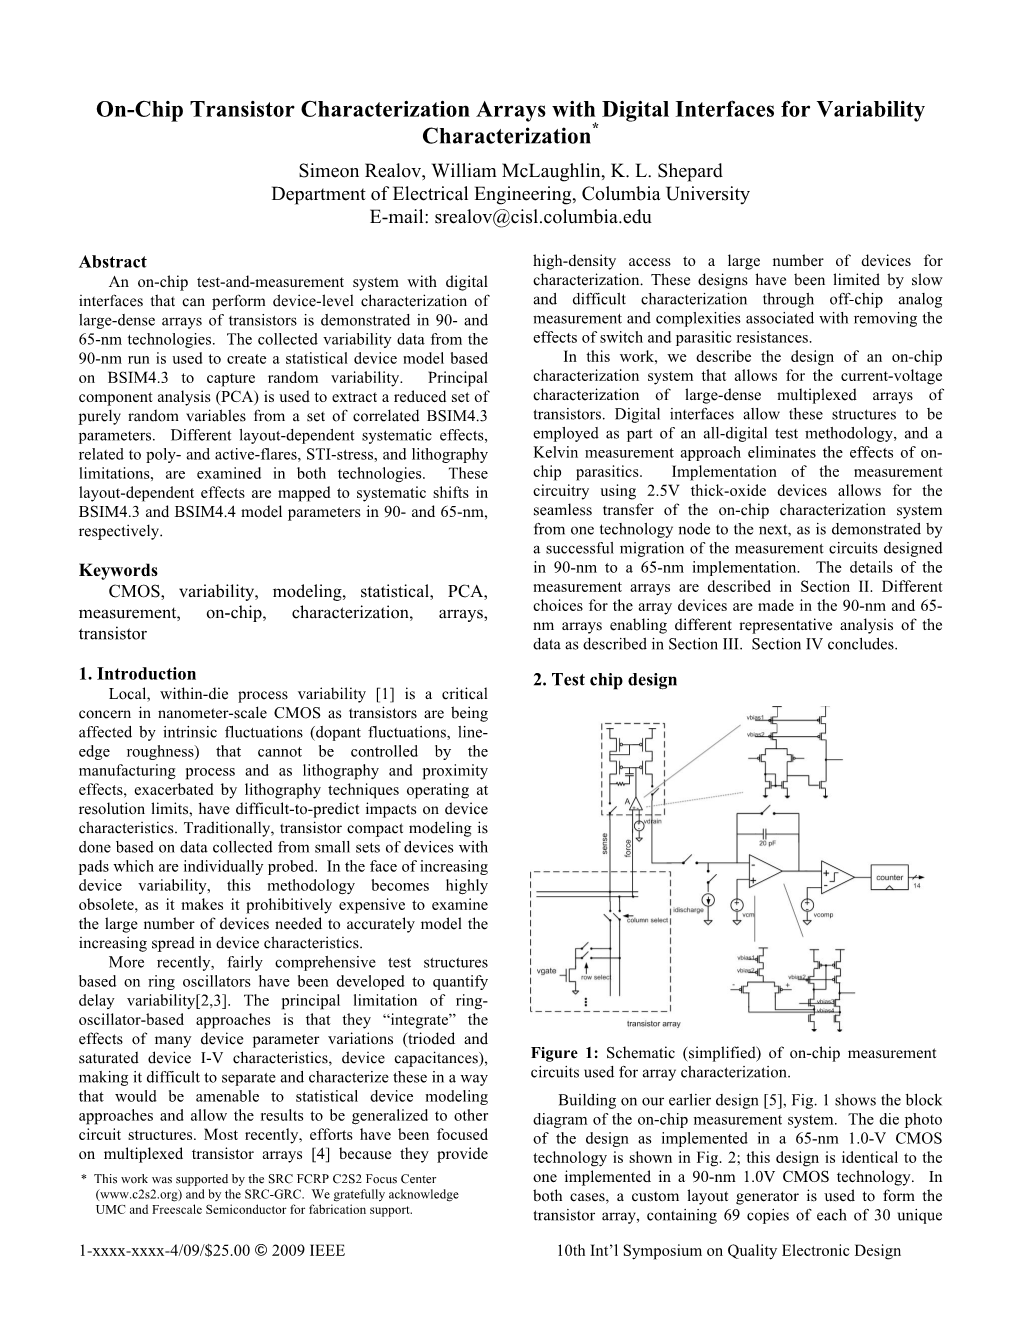 On-Chip Transistor Characterization Arrays with Digital Interfaces for Variability Characterization* Simeon Realov, William Mclaughlin, K